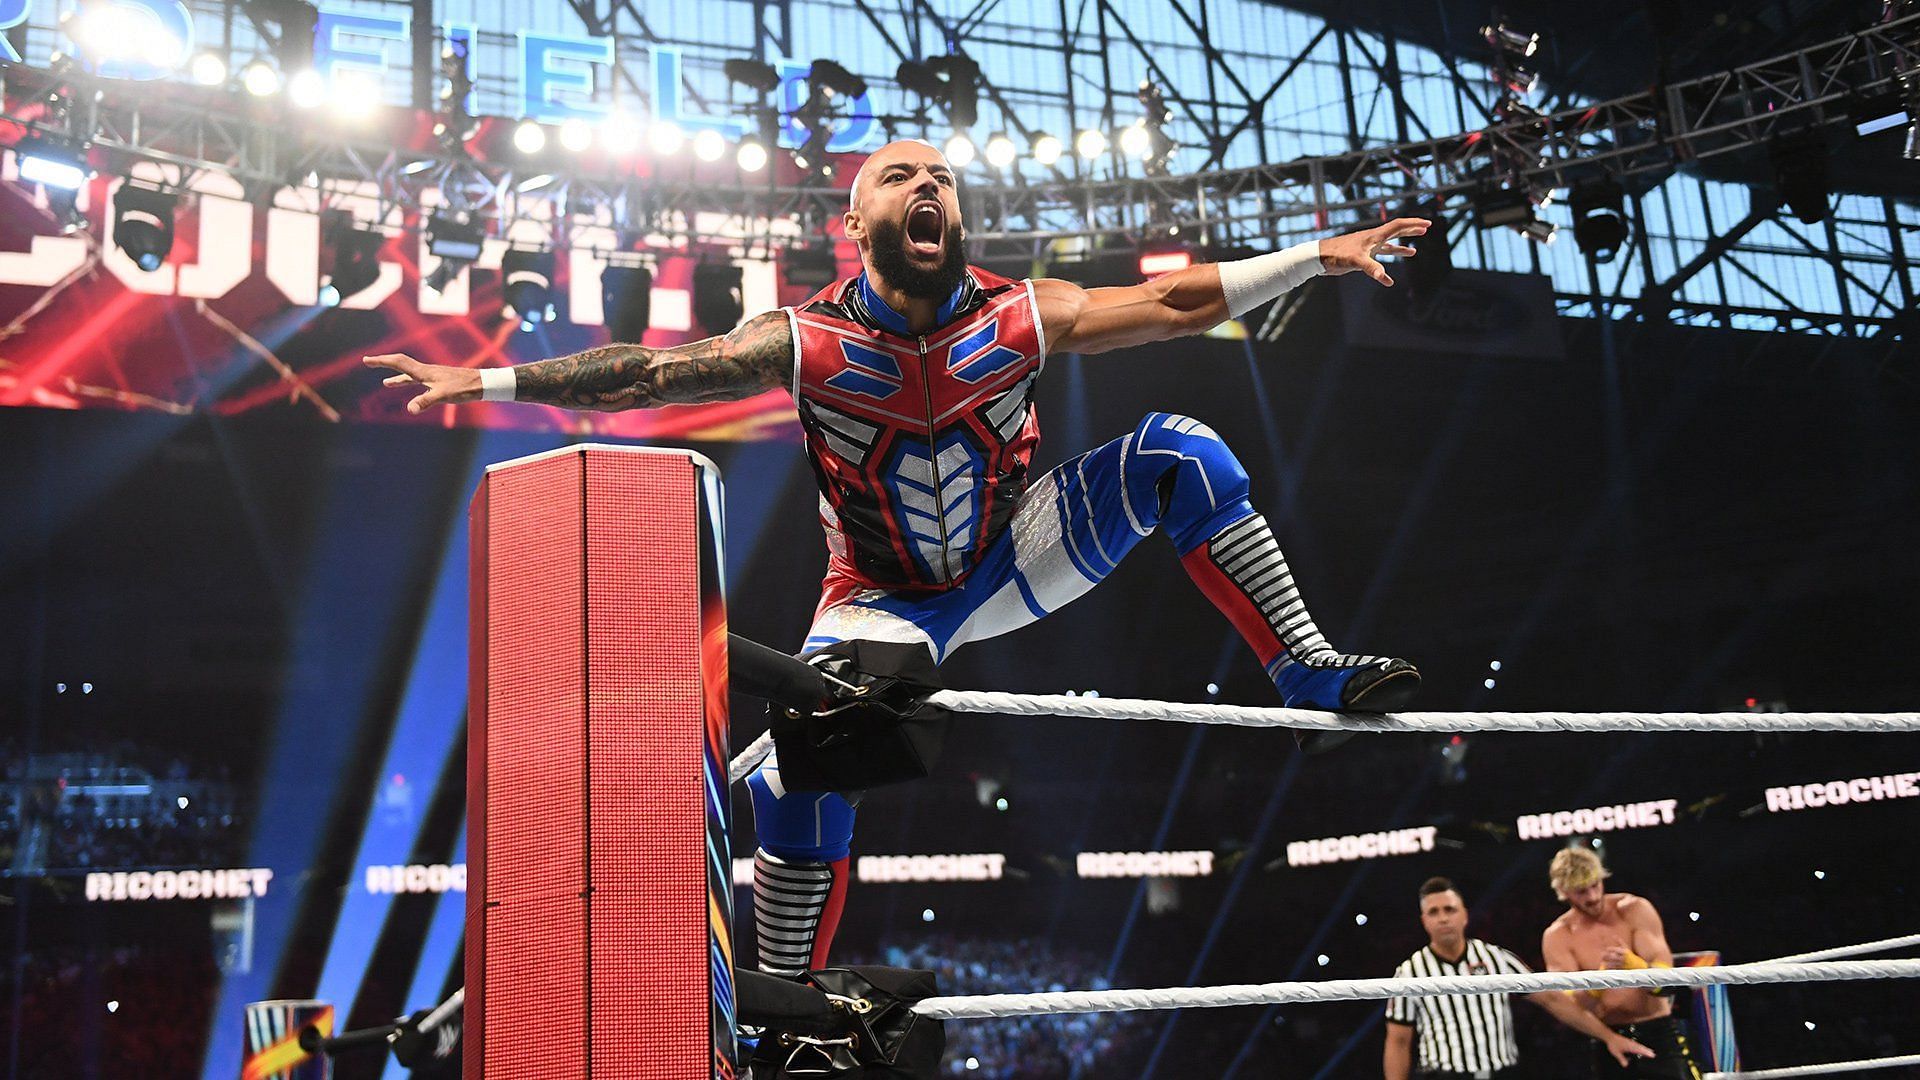 Ricochet poses for the WWE Universe before match